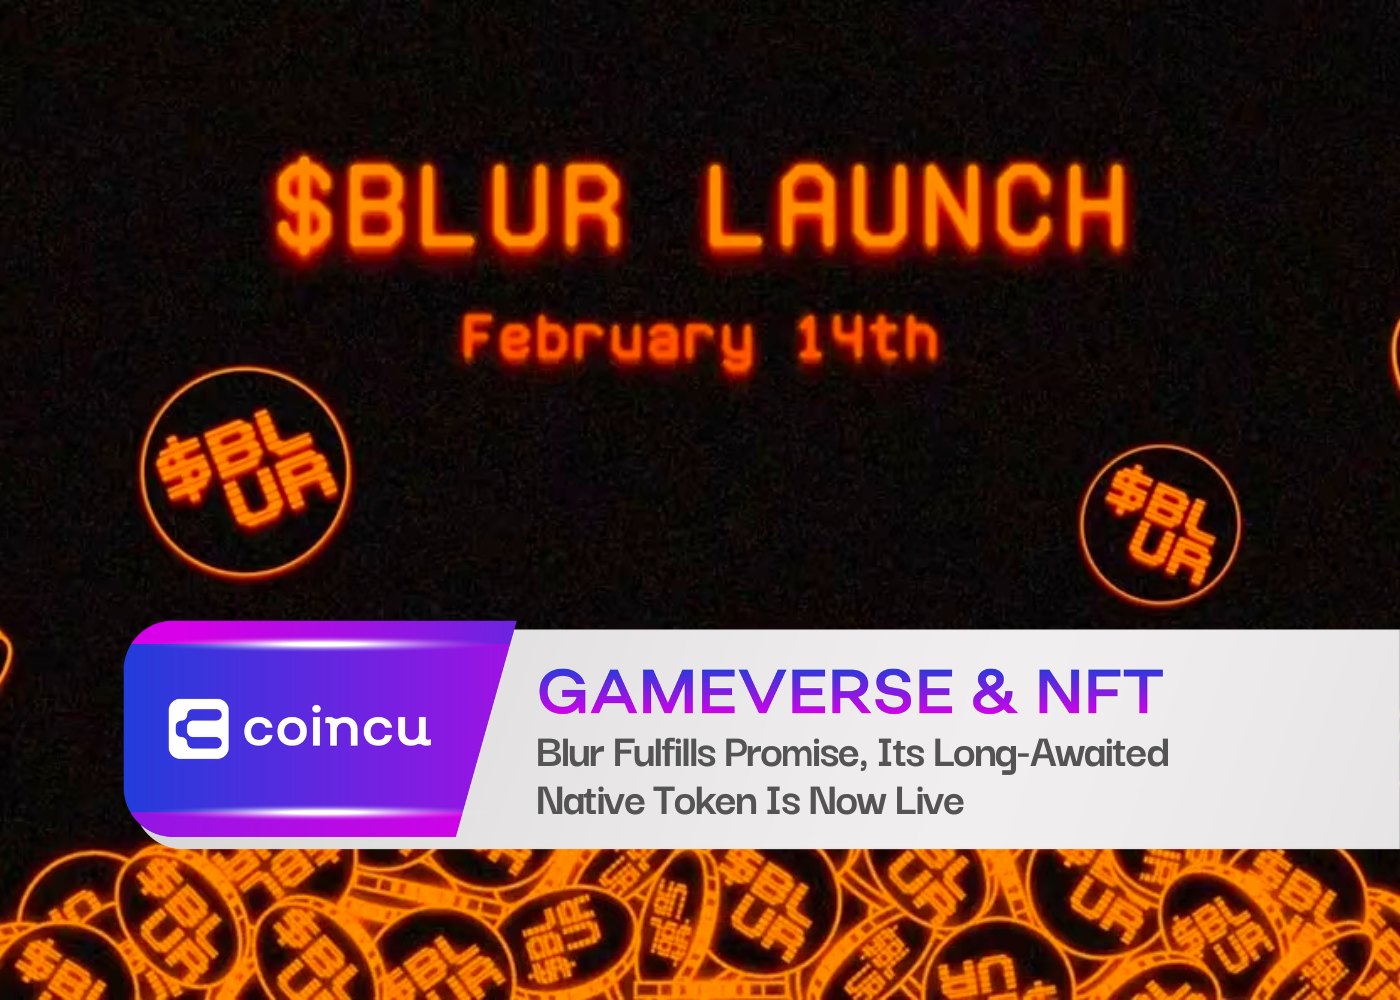 Blur Fulfills Promise, Its Long-Awaited Native Token Is Now Live